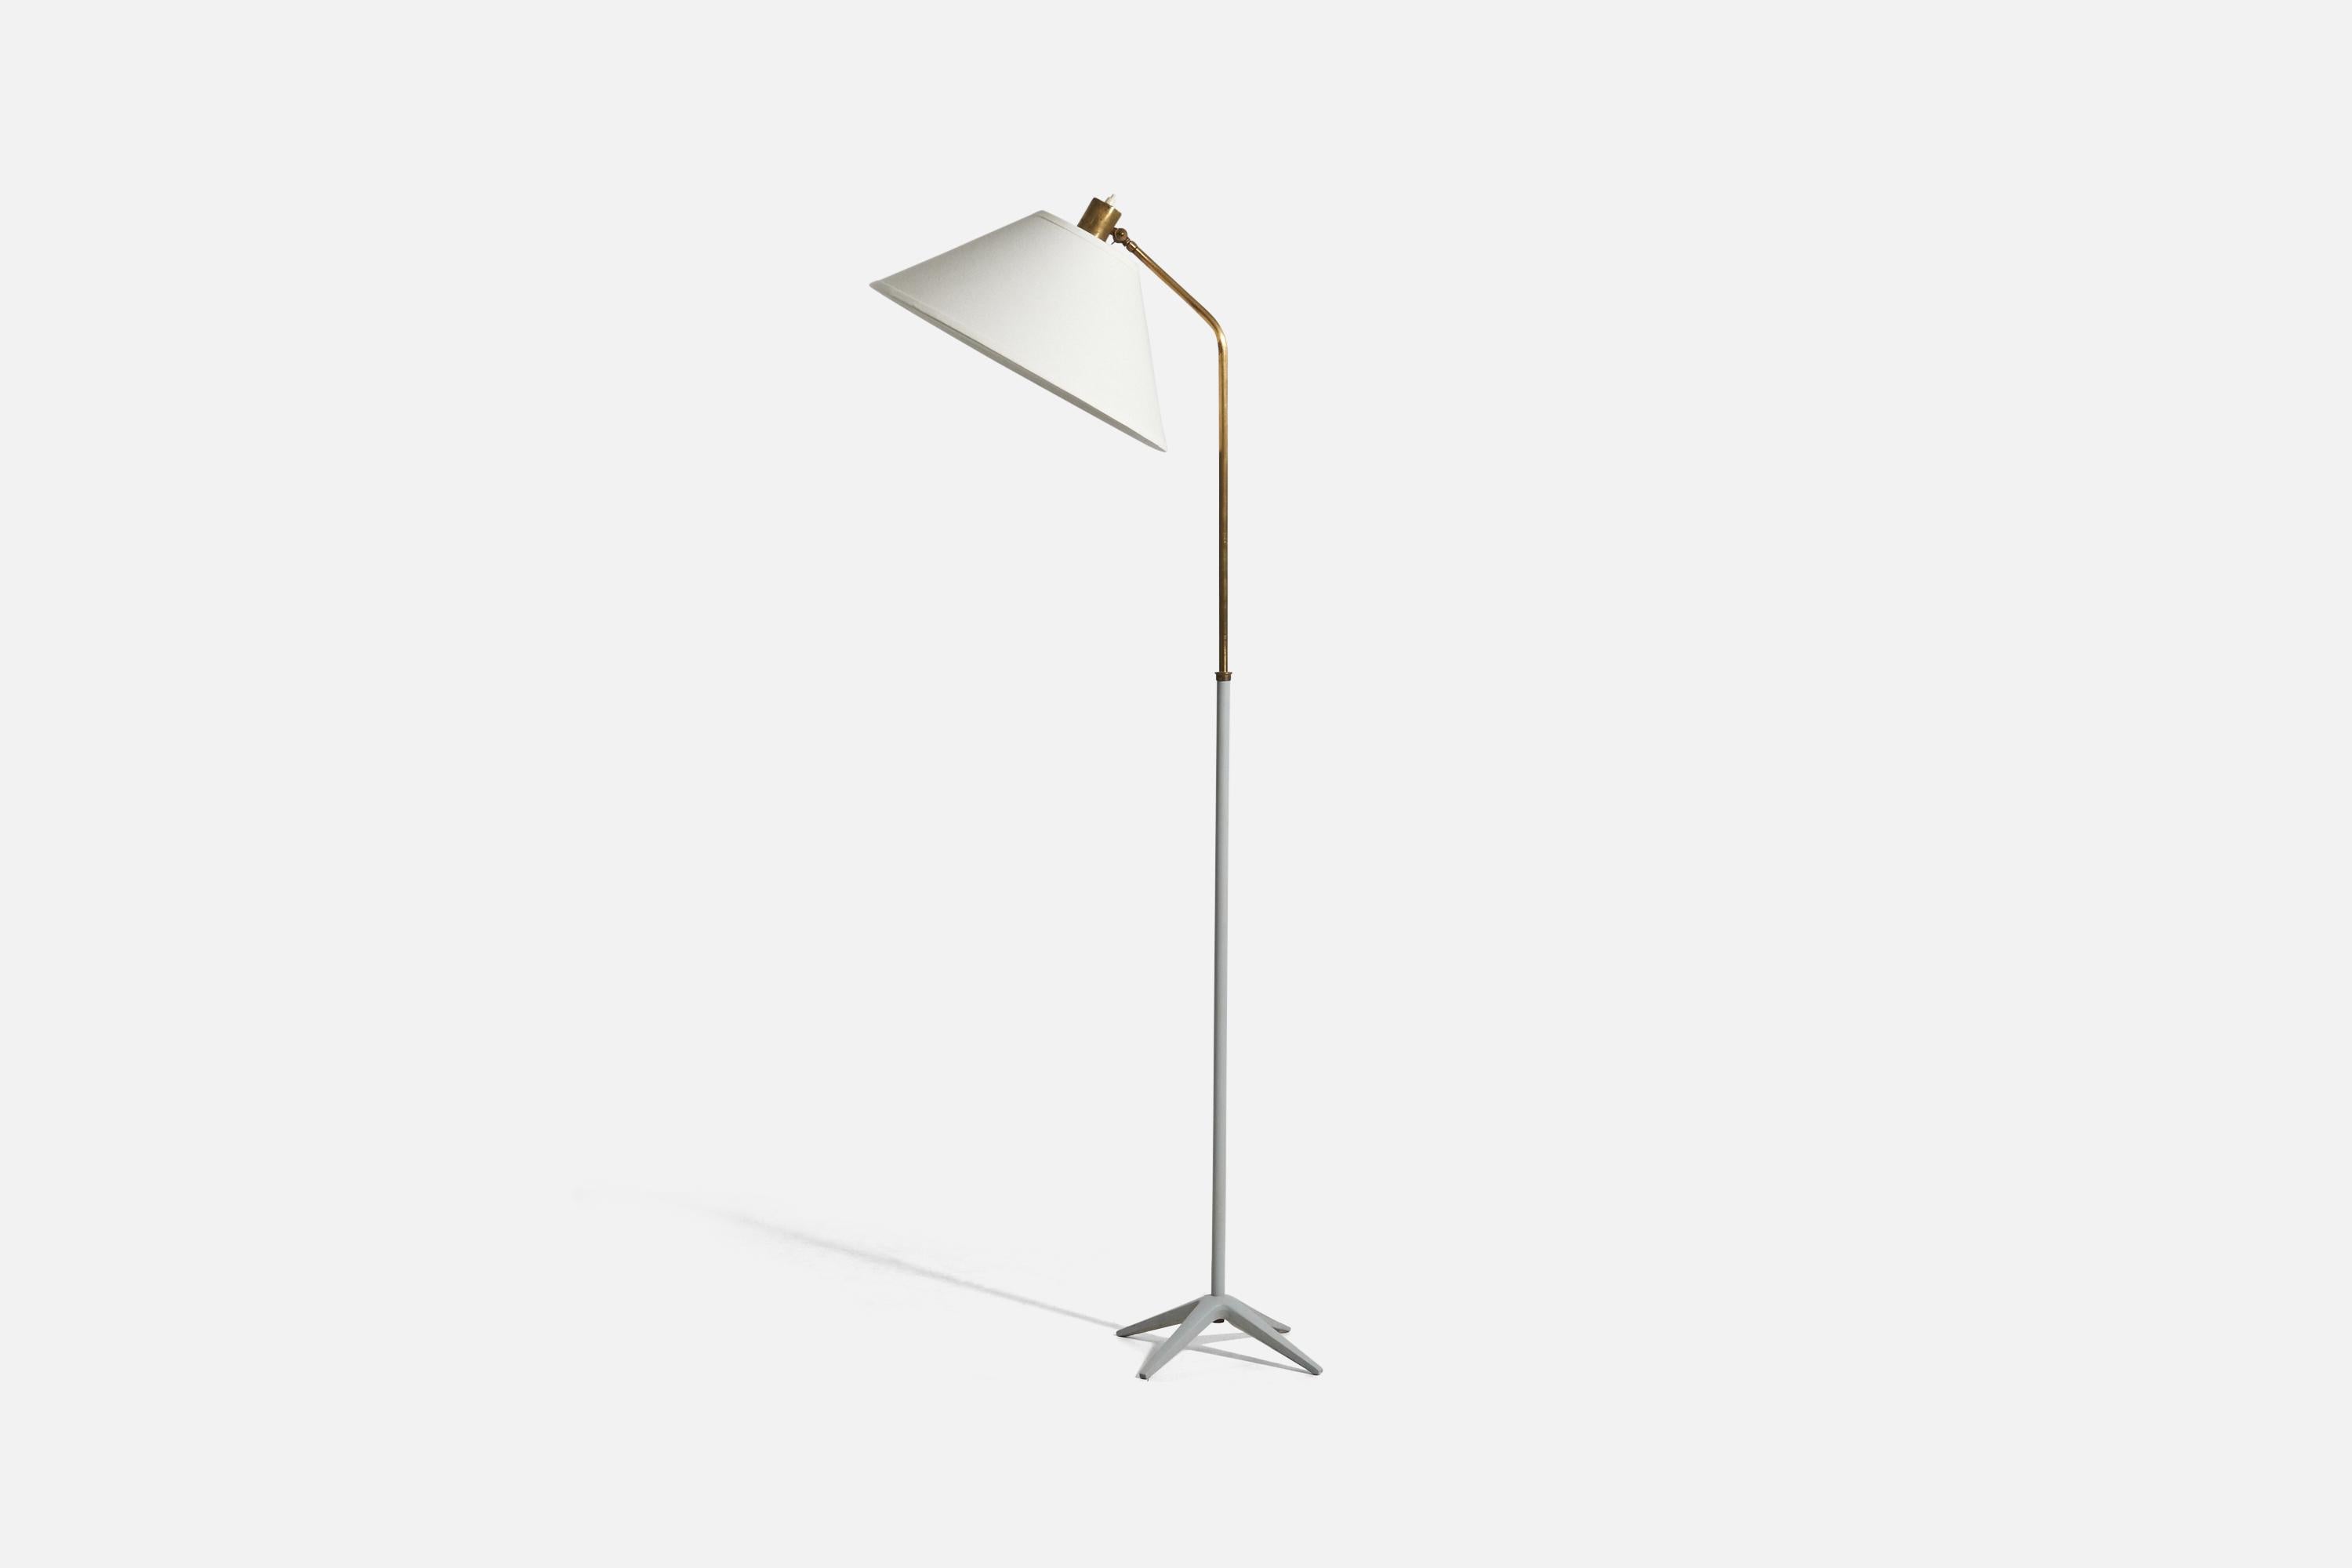 A brass, metal and fabric floor lamp designed by Harald Notini and produced by Böhlmarks, Sweden, 1940s. Stamped with maker's logo.

Dimensions variable, measured as illustrated in first image.

Sold with Lampshade(s). Dimensions stated are of Floor